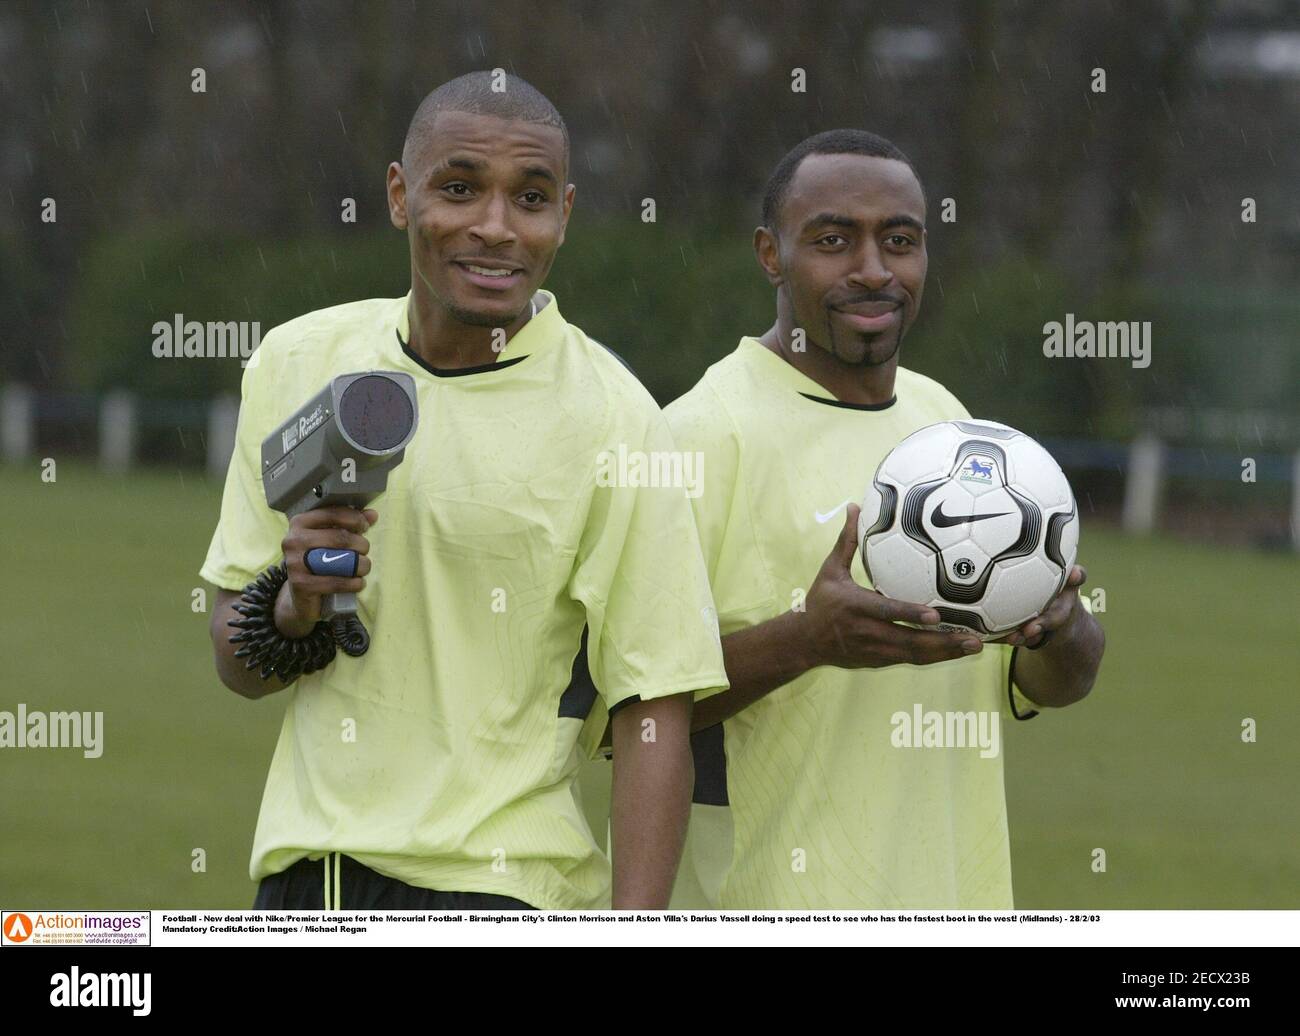 Football - New deal with Nike/Premier League for the Mercurial Football -  Birmingham City's Clinton Morrison and Aston Villa's Darius Vassell doing a  speed test to see who has the fastest boot